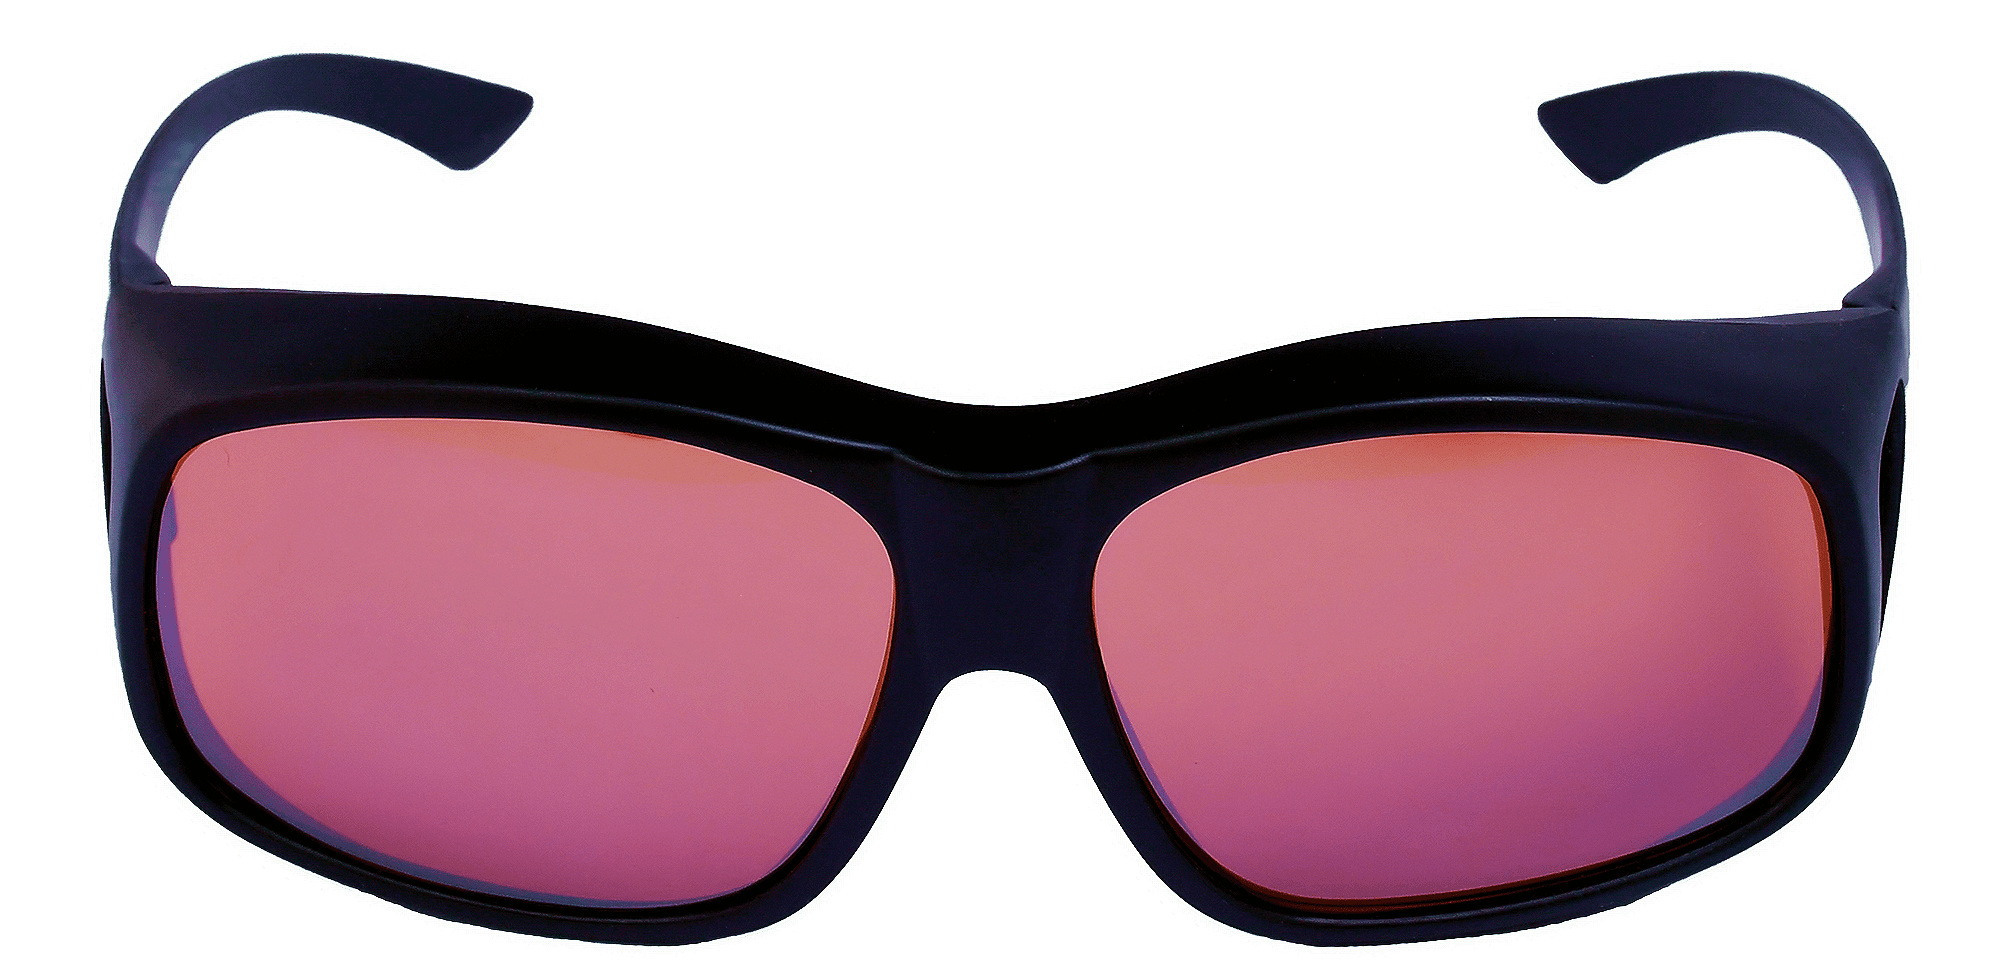 Womens Safety Sunglasses FIT OVER PRESCRIPTION RX GLASSES Fitover SMALLER FACES